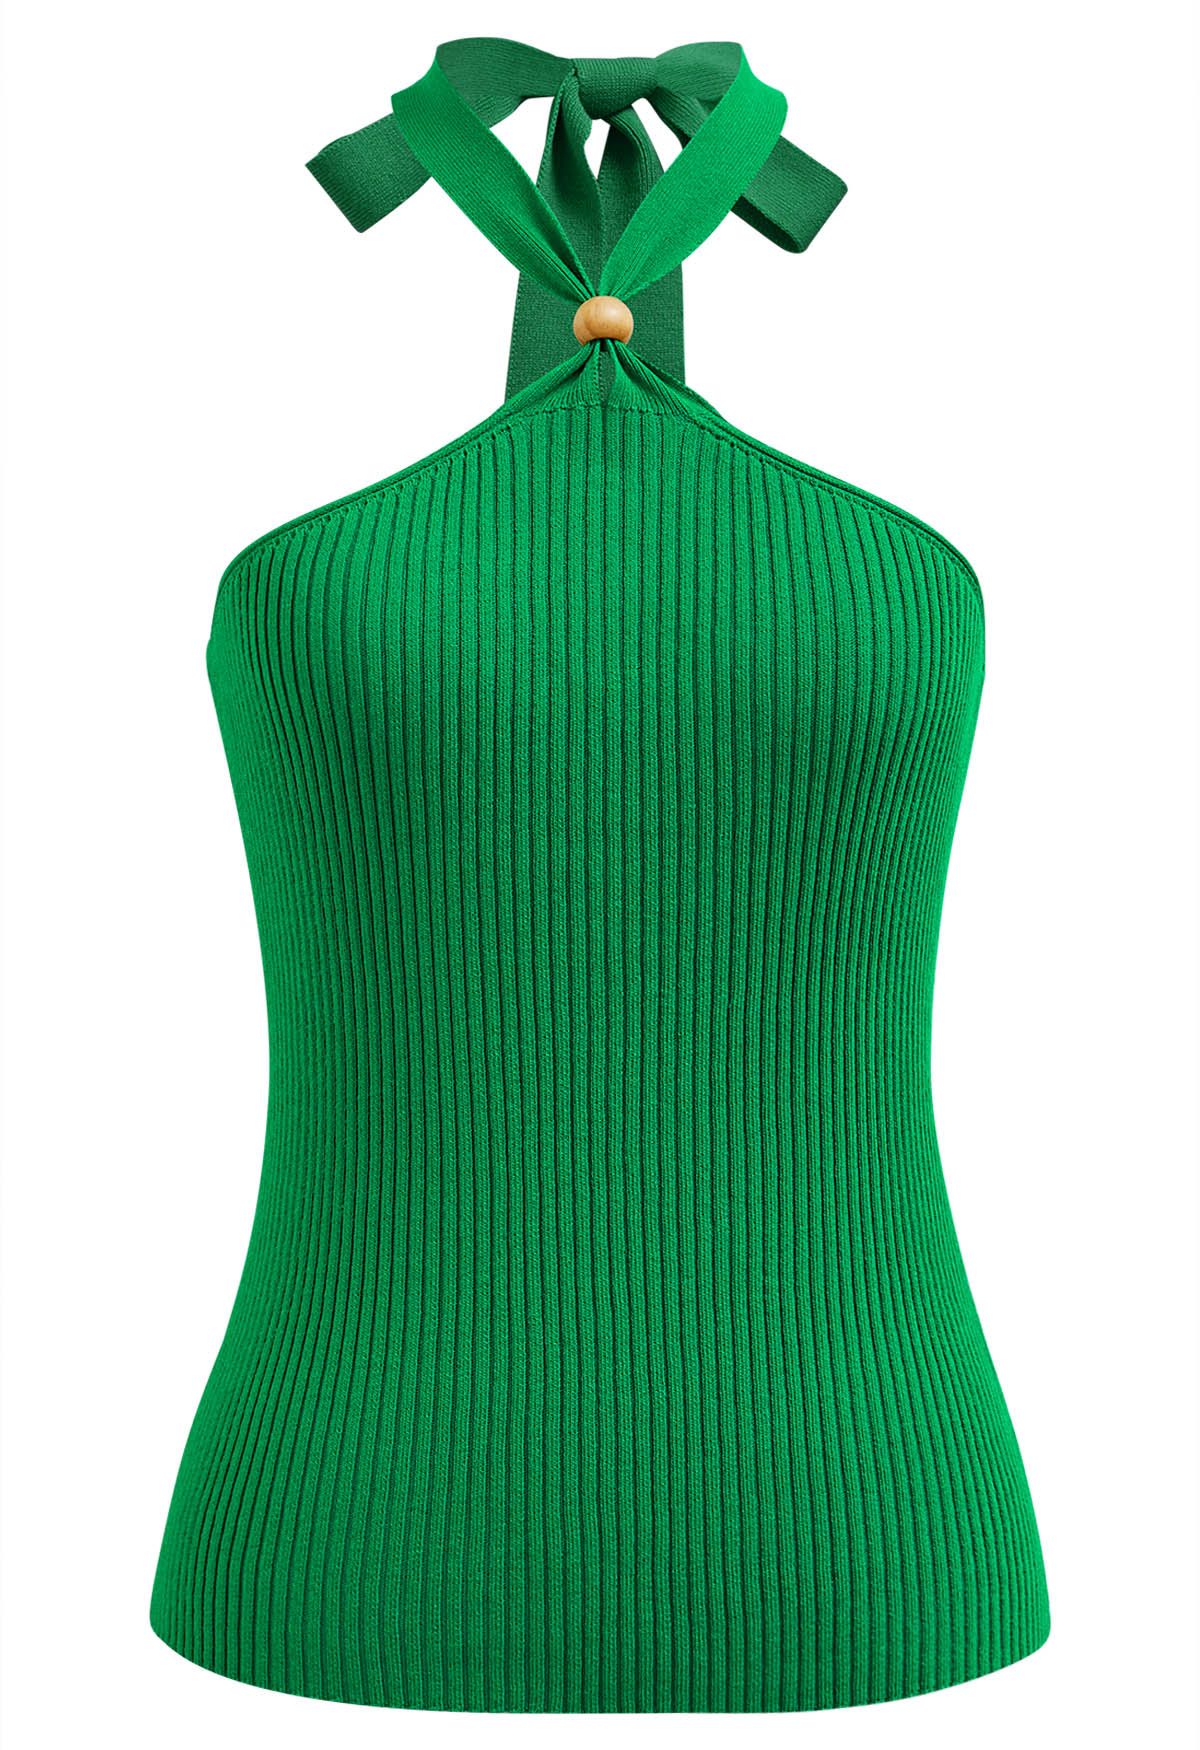 Wooden Bead Decor Halter Knit Top in Green